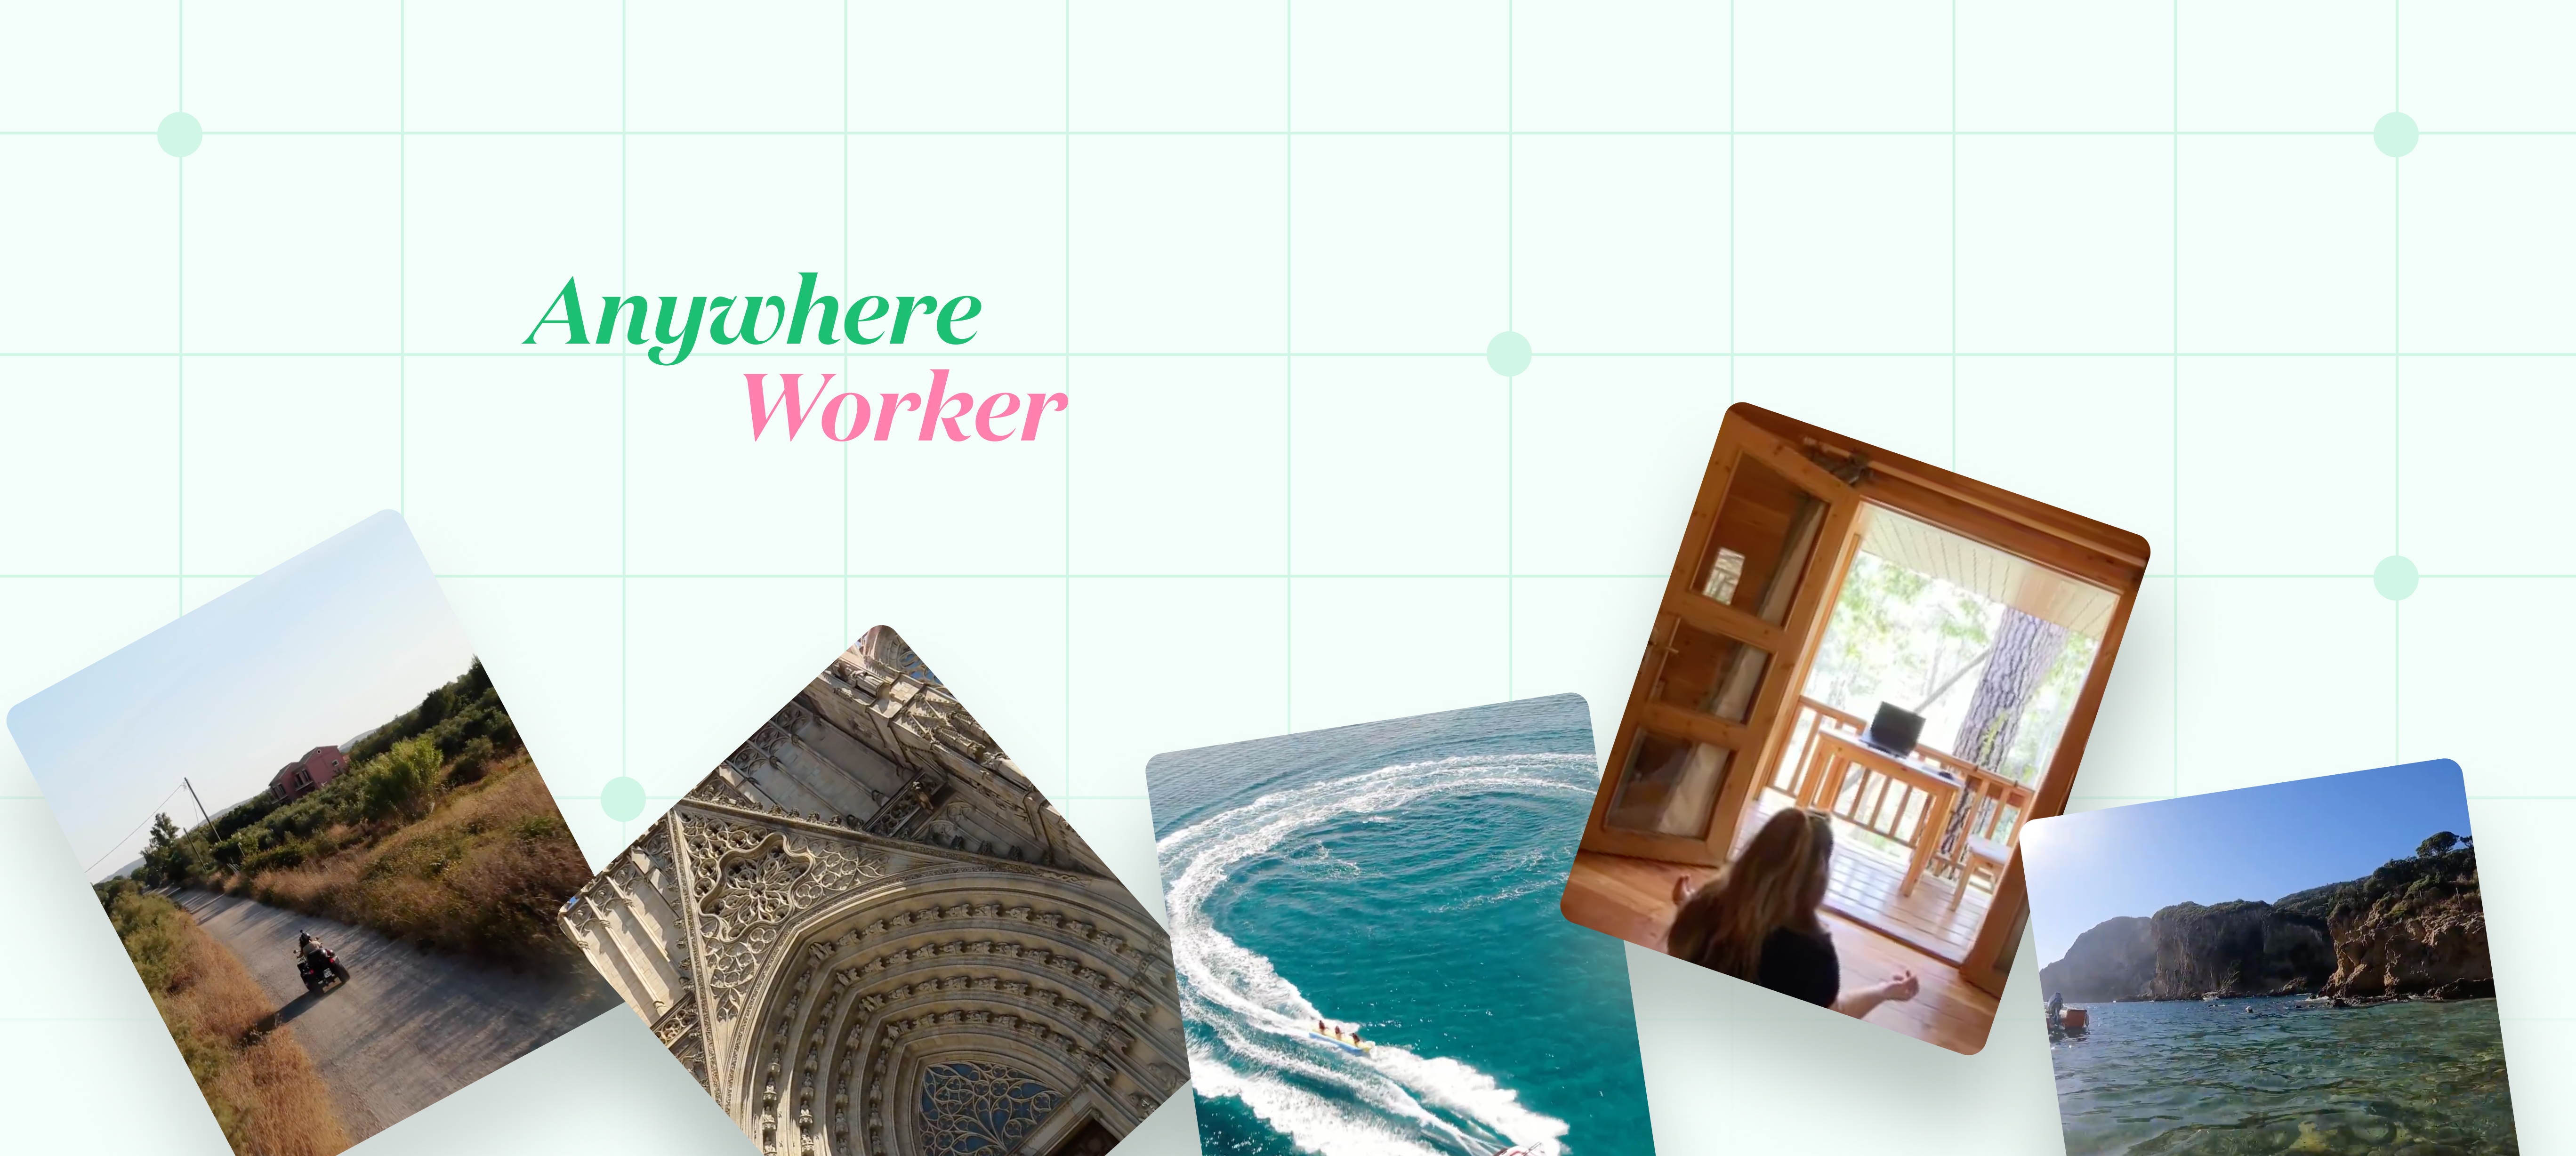 Anywhere Worker Press Page Image